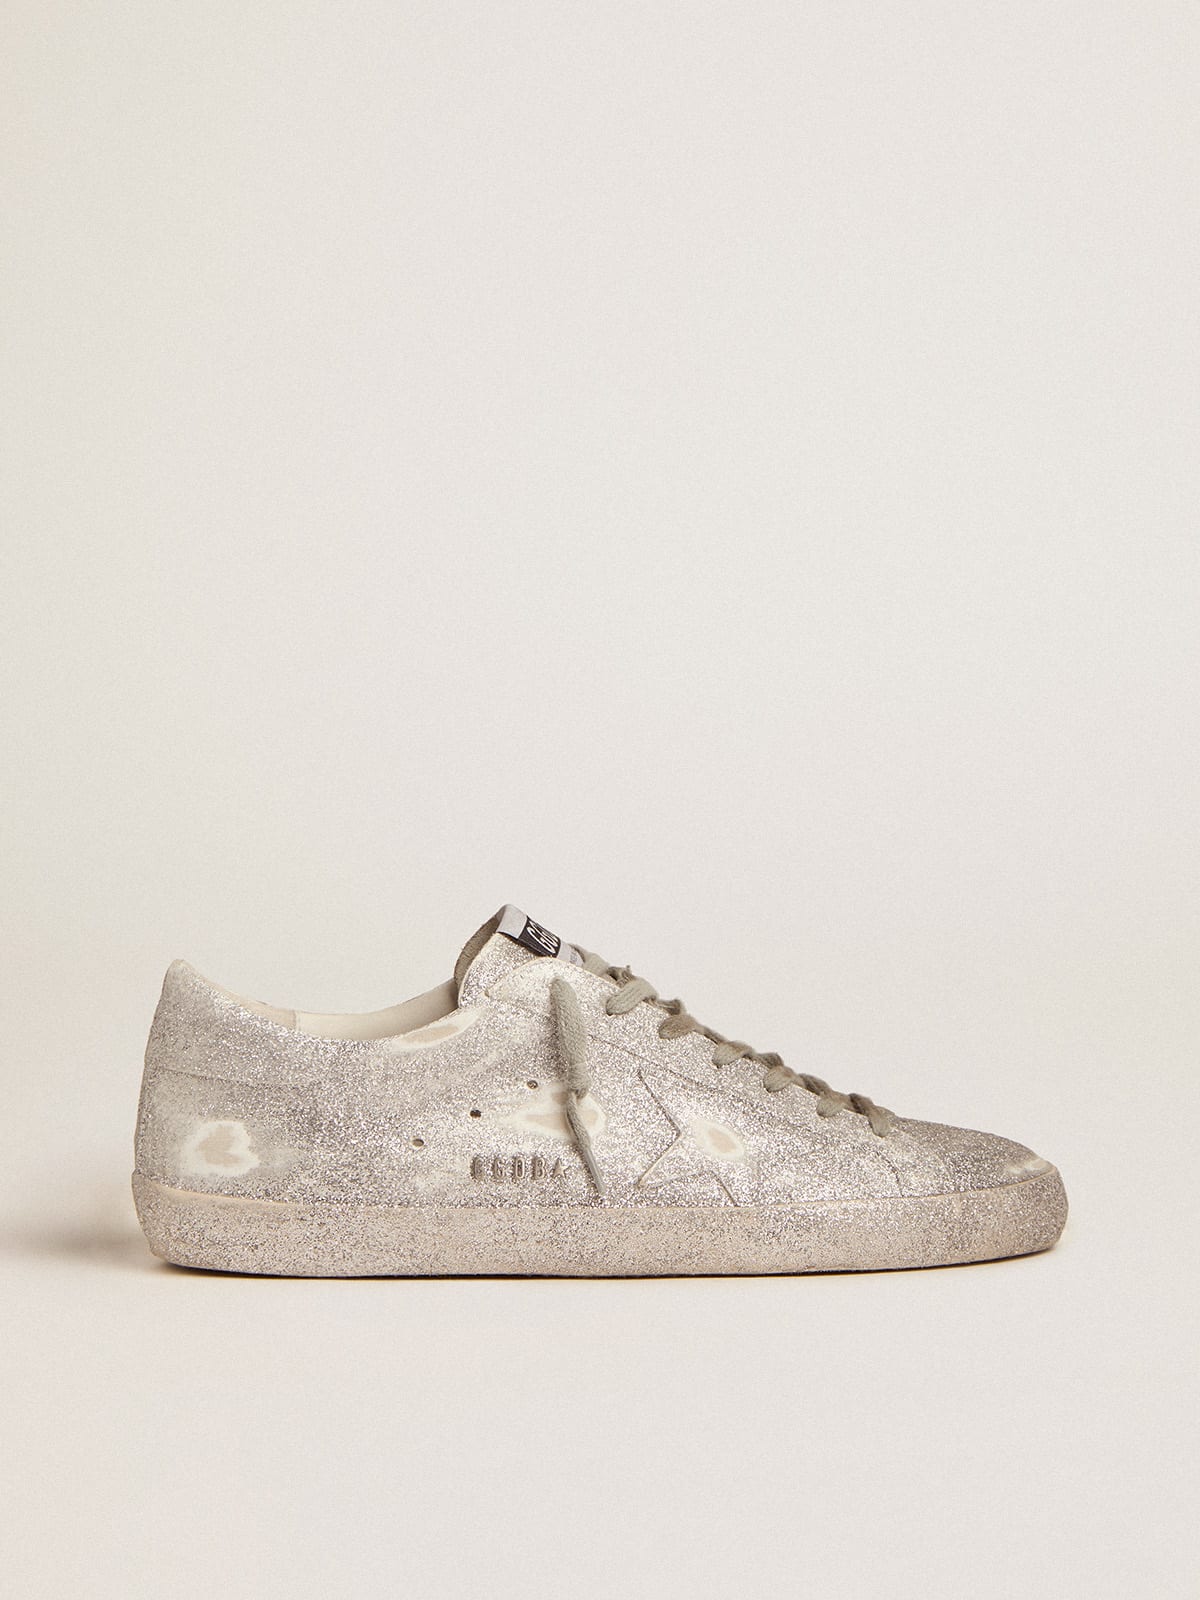 Super-Star sneakers in silver leather with all-over glitter dust